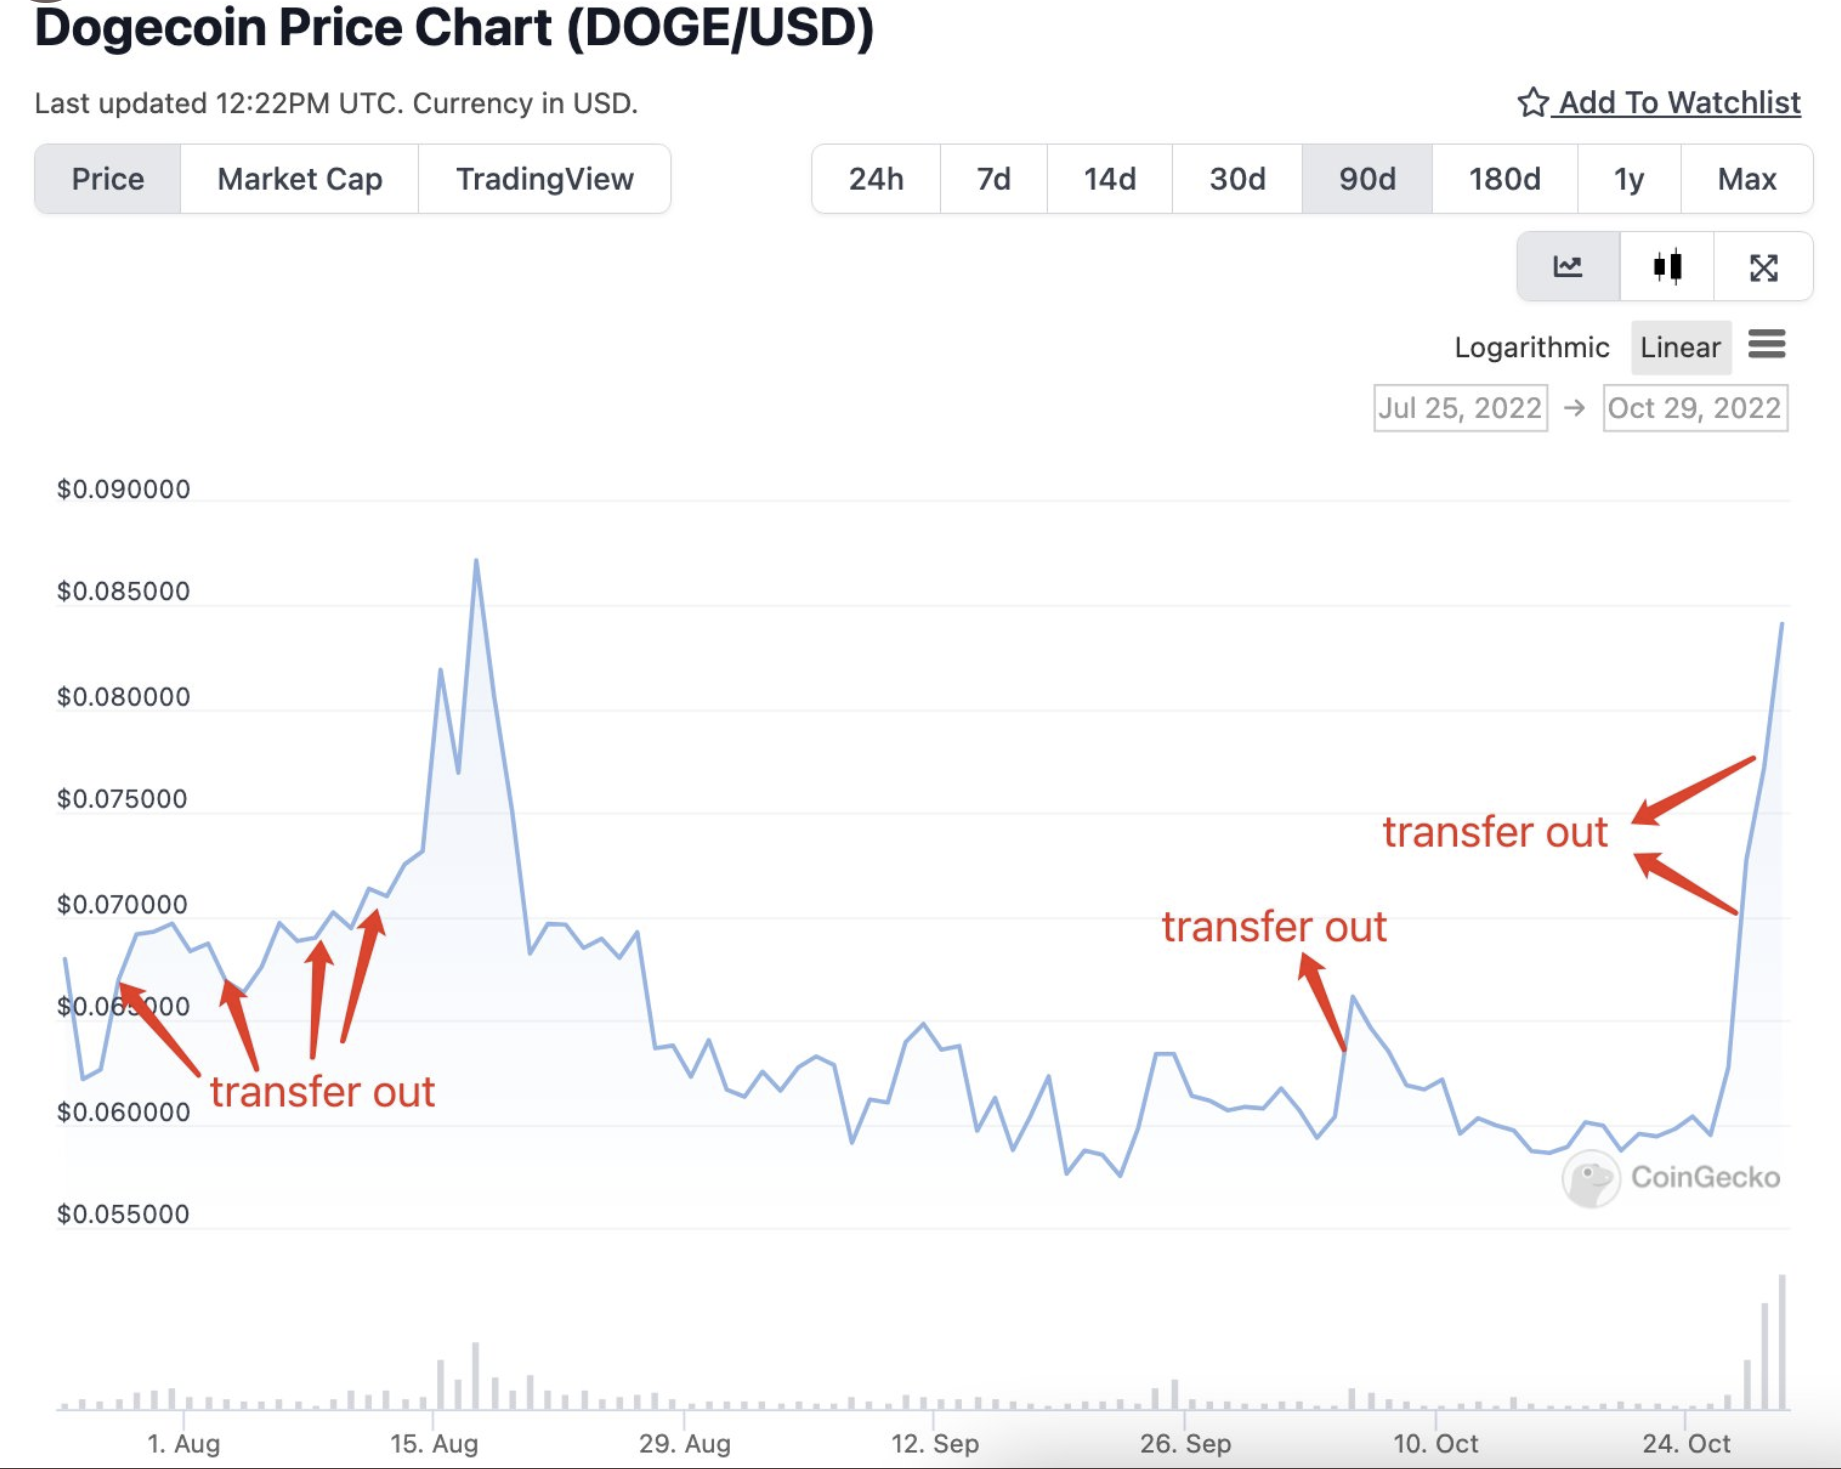 DOGE Dogecoin whales